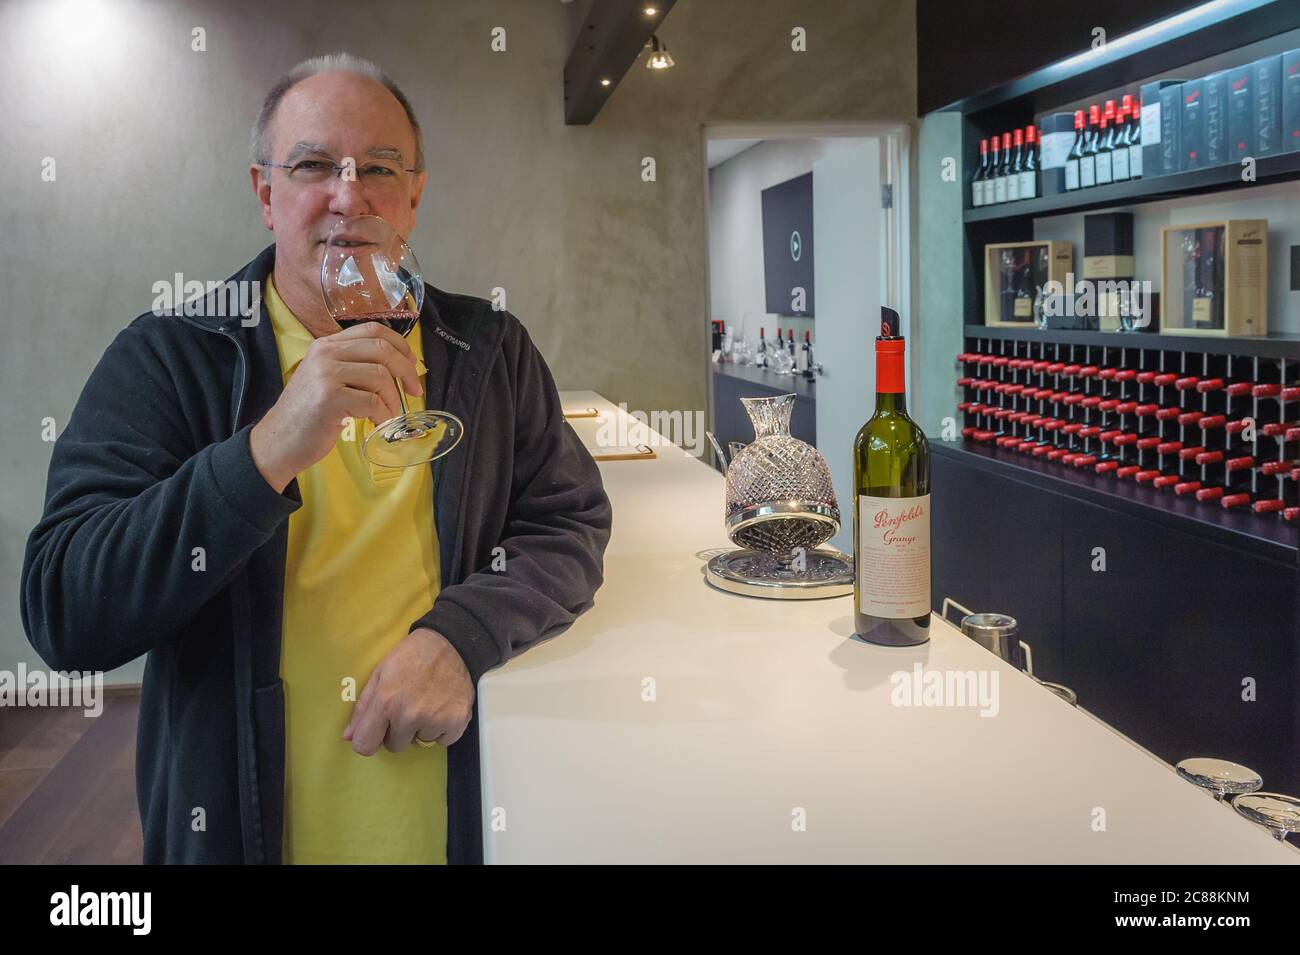 A male tourist enjoys a wine tasting session with the iconic Penfolds Grange at the Penfolds Cellar Door in the Barossa Valley in South Australia. Stock Photo